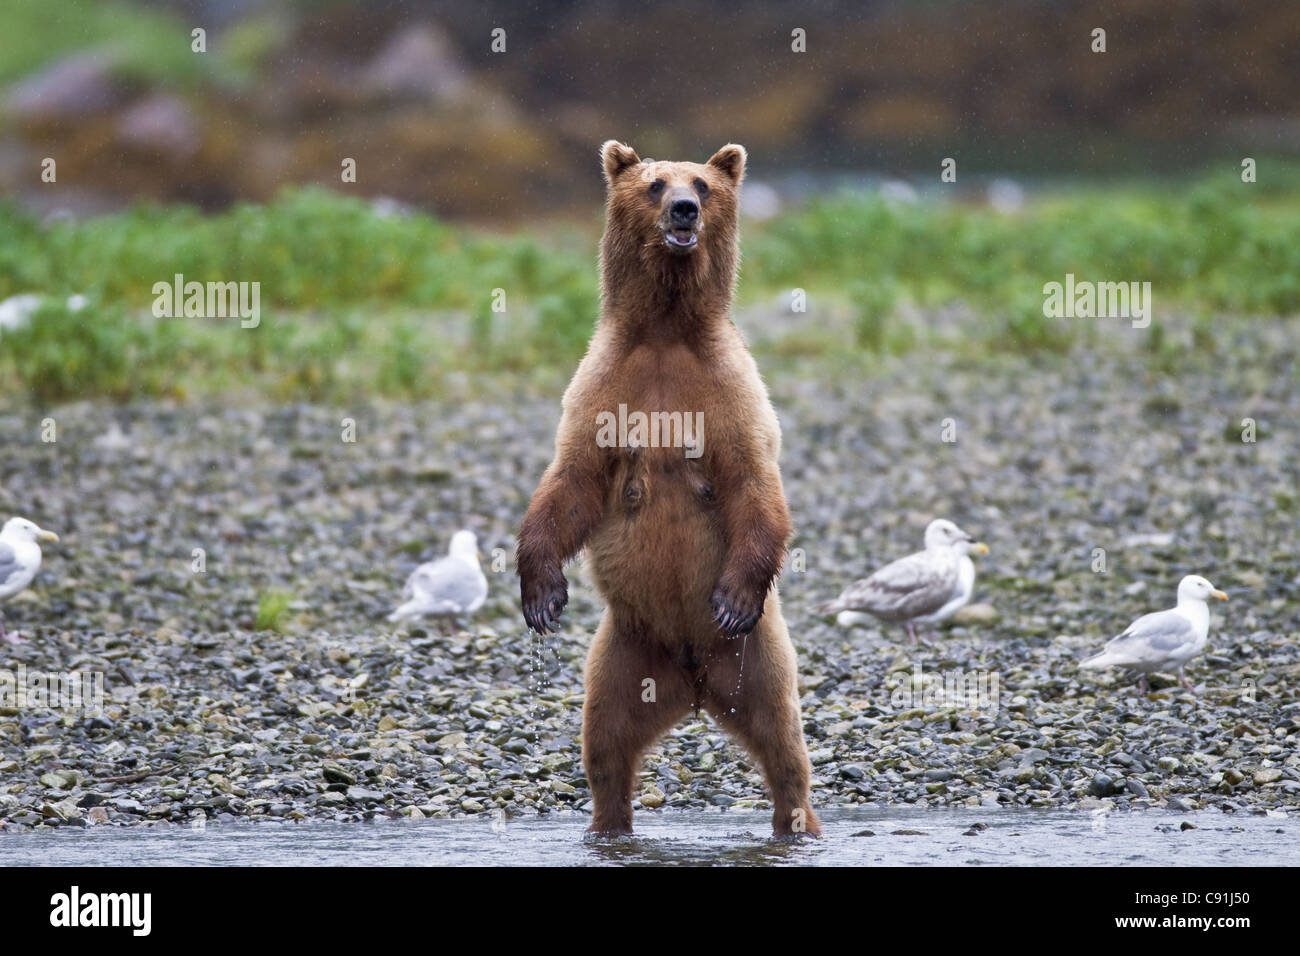 Brown bear sow standing alert on riverbank, Prince William Sound, Southcentral Alaska, Summer Stock Photo